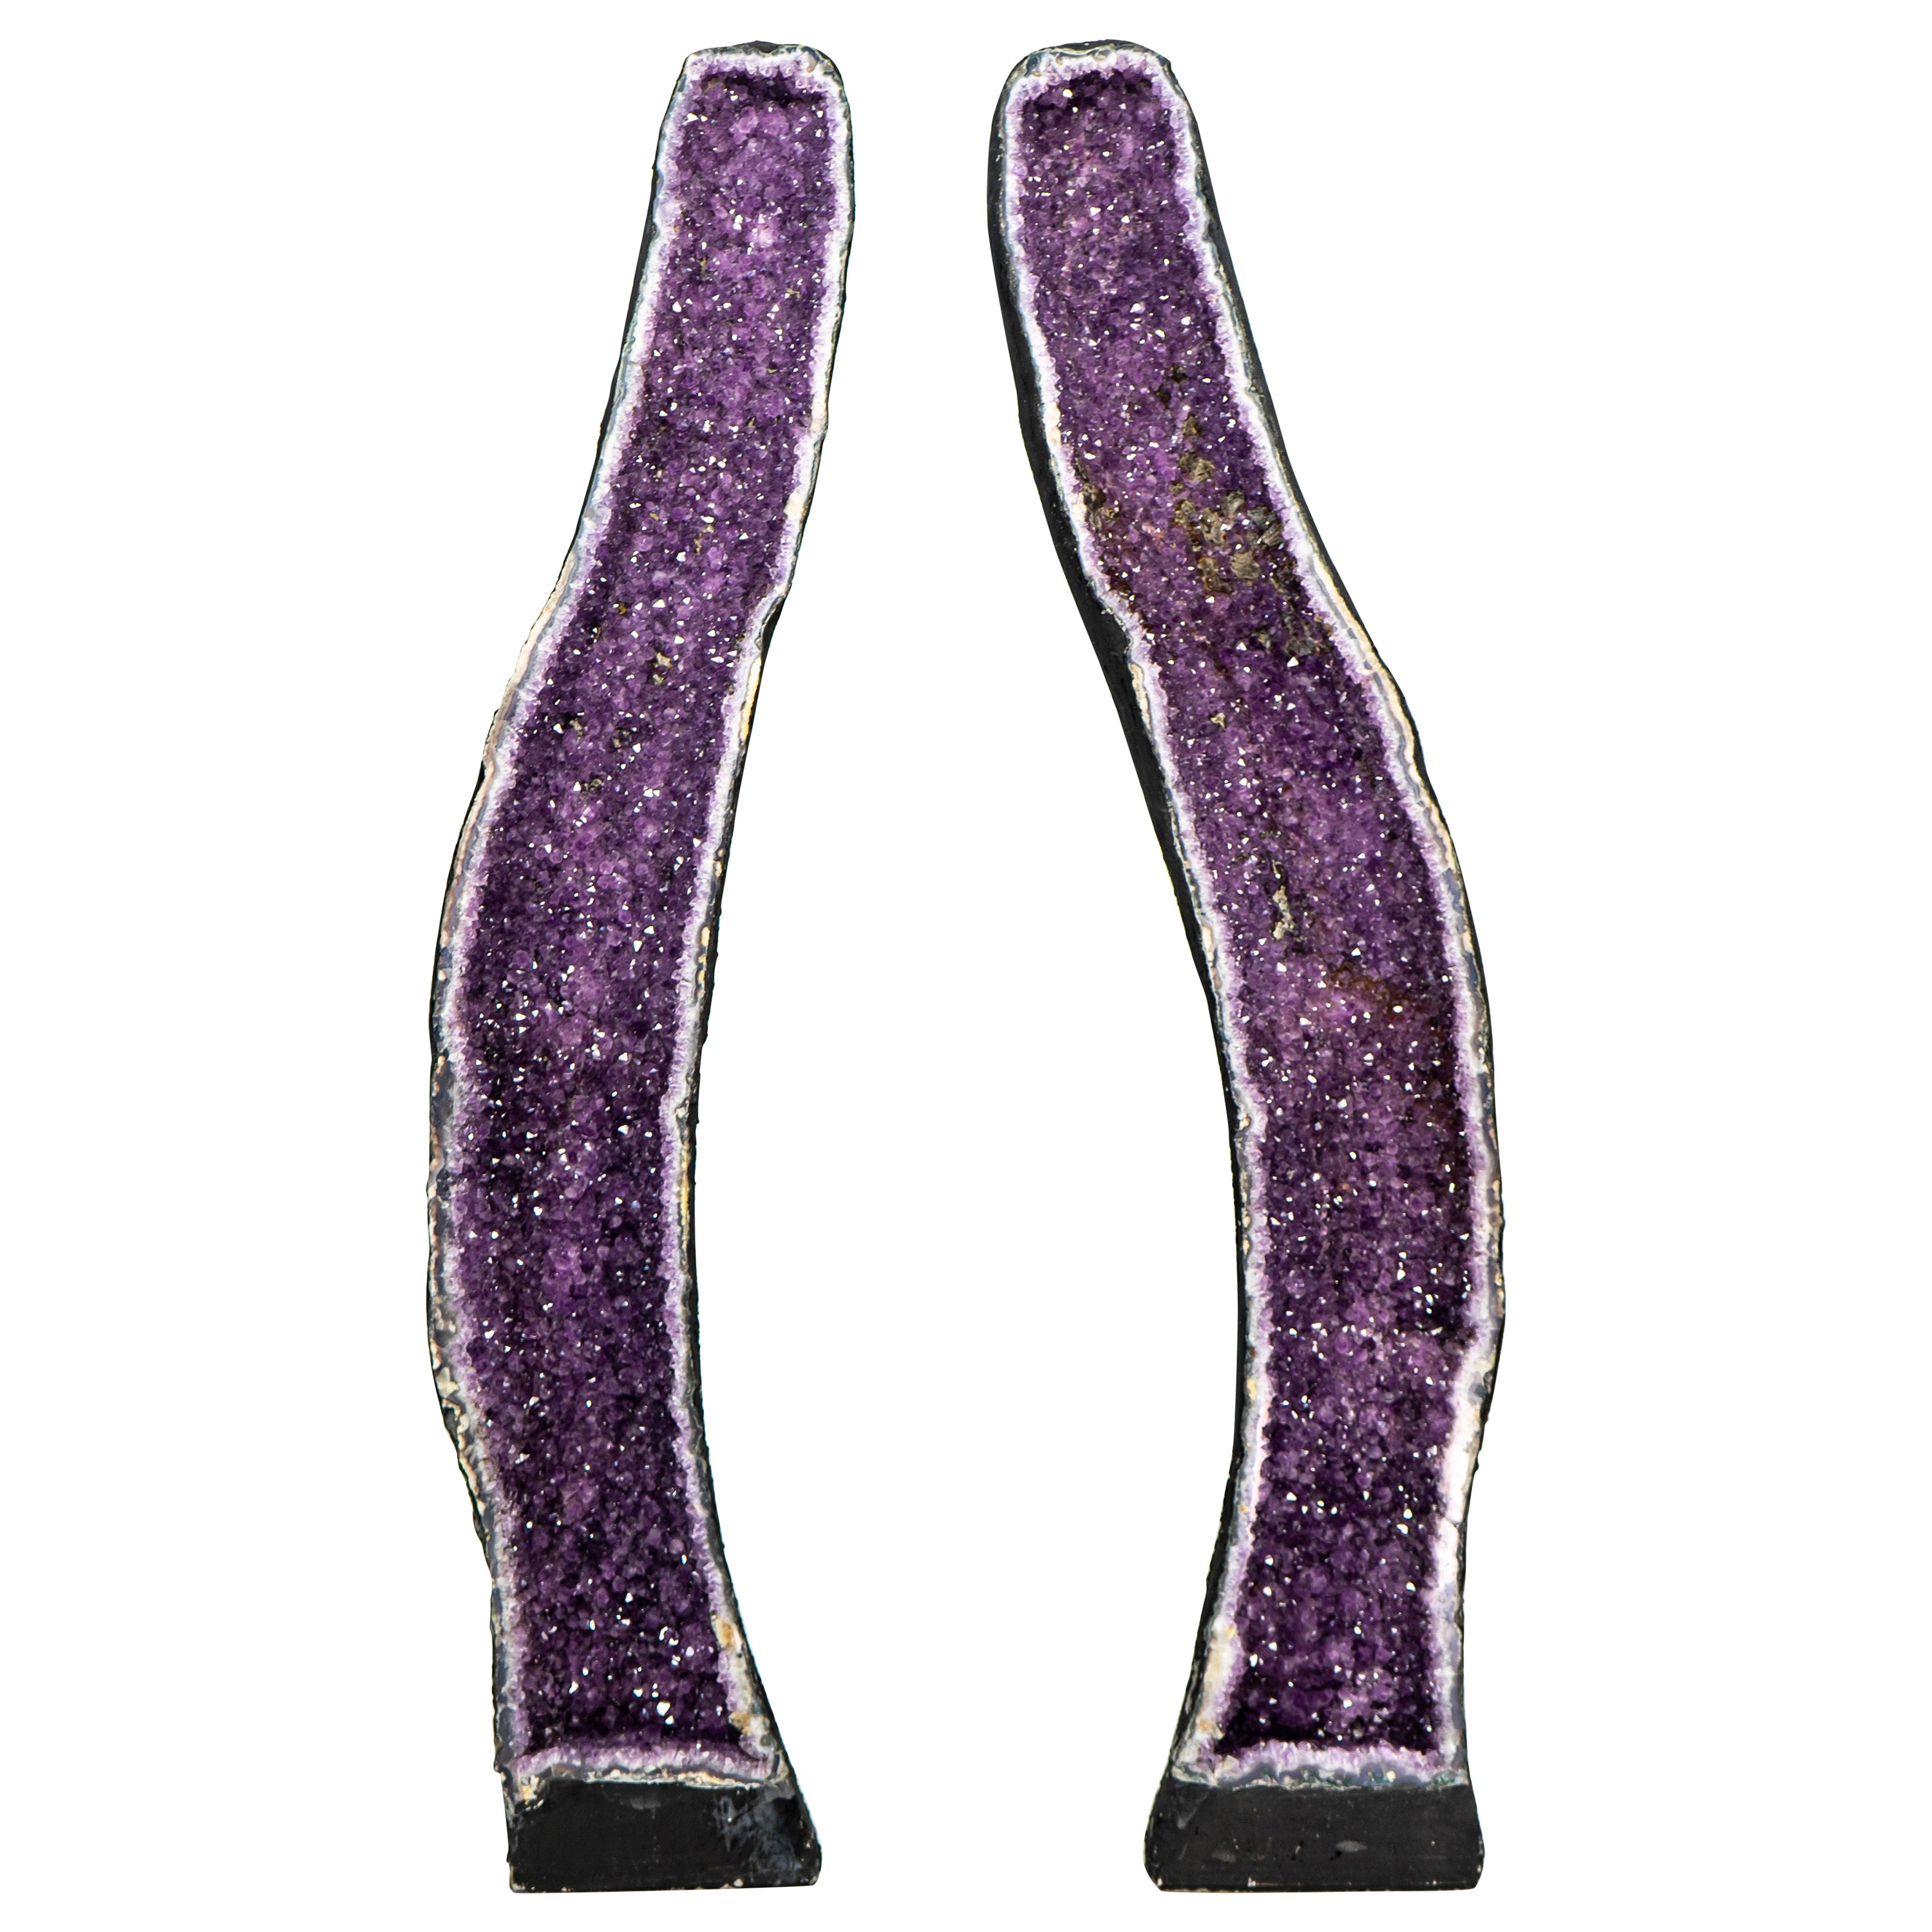 Pair of Purple, X-Tall Amethyst Geode Cathedrals Formed in Archway For Sale